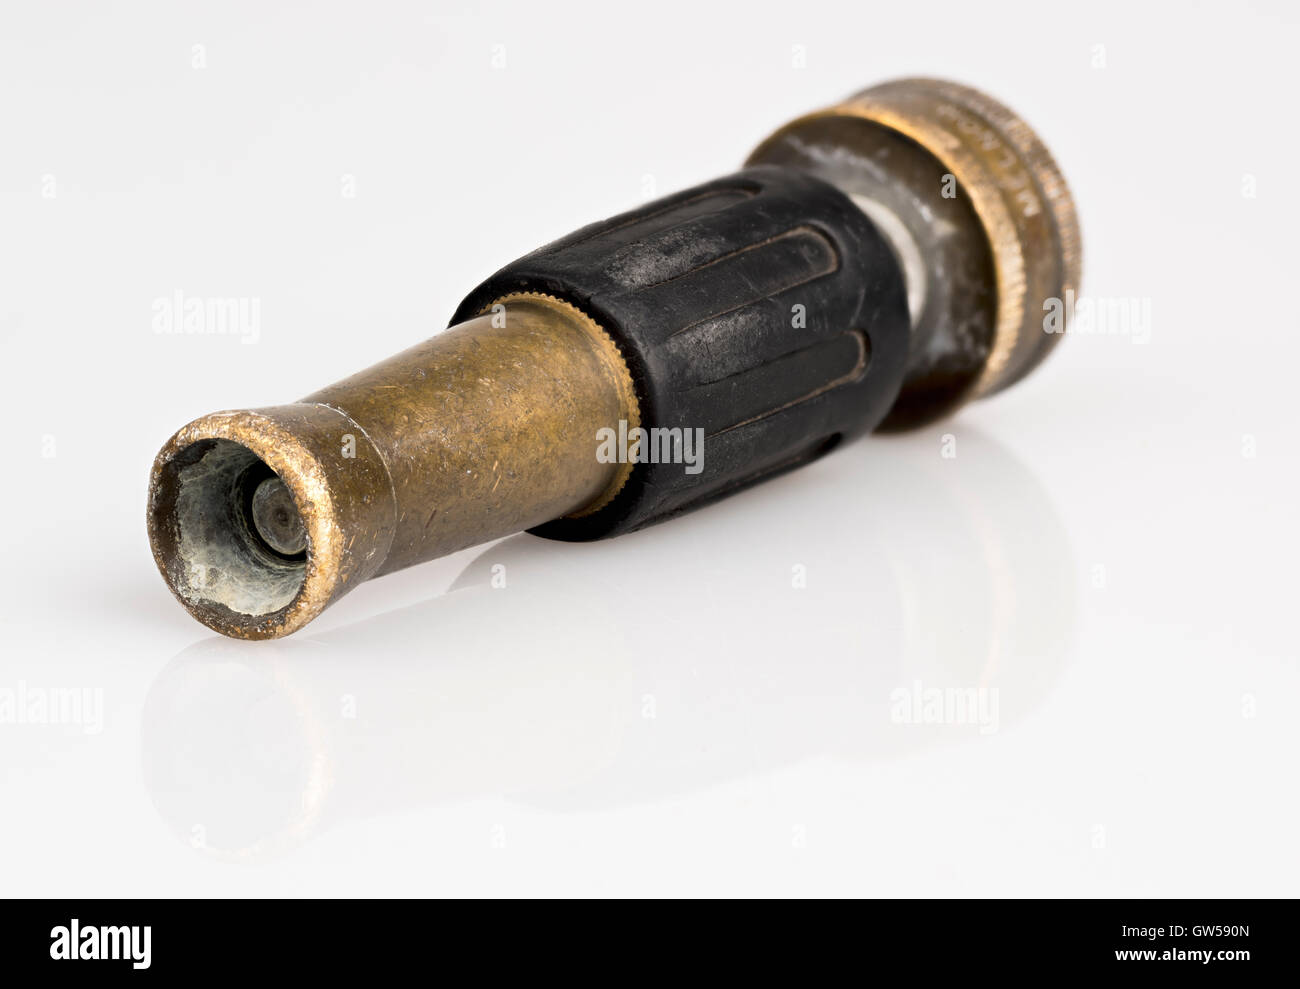 Nozzle for a garden hose that has been well used Stock Photo